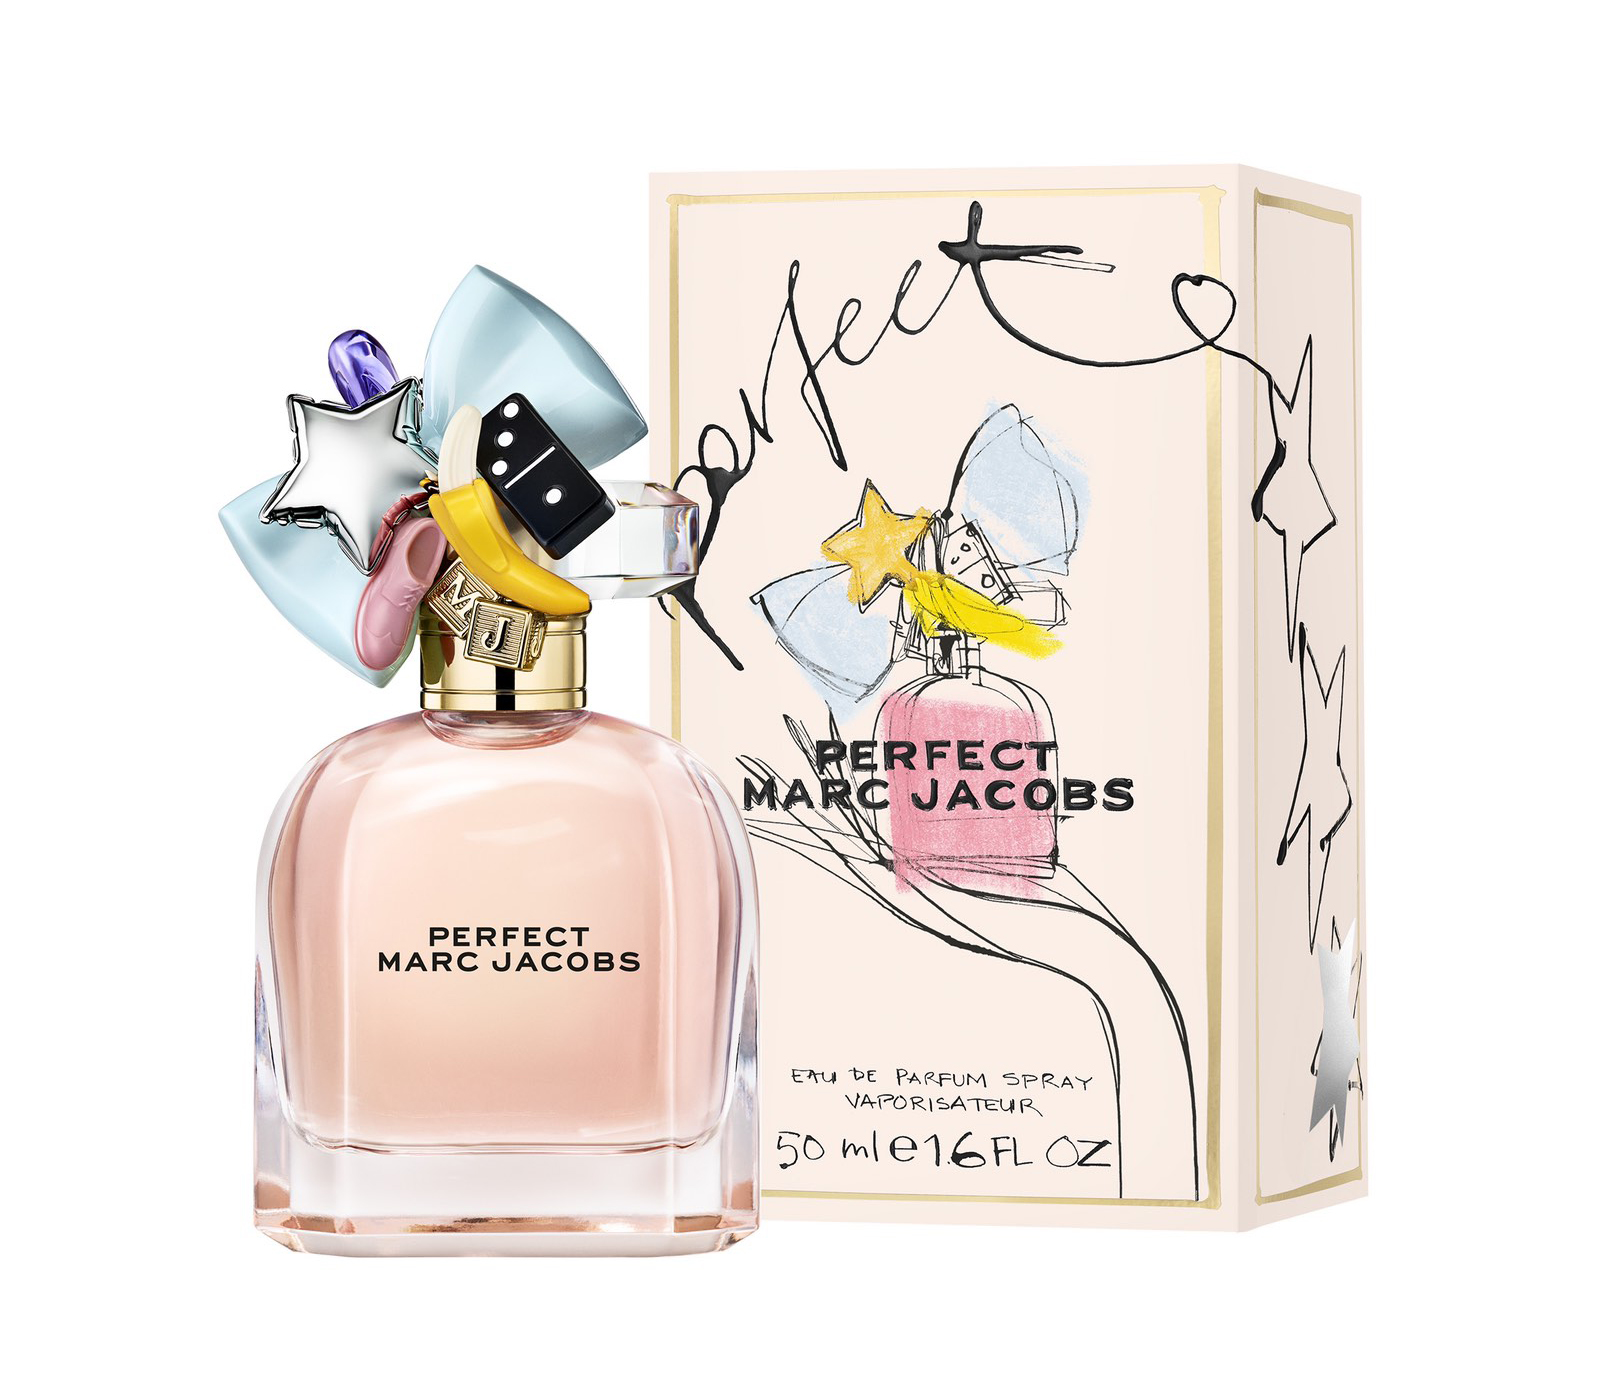 Perfect – nowy zapach Marc Jacobs